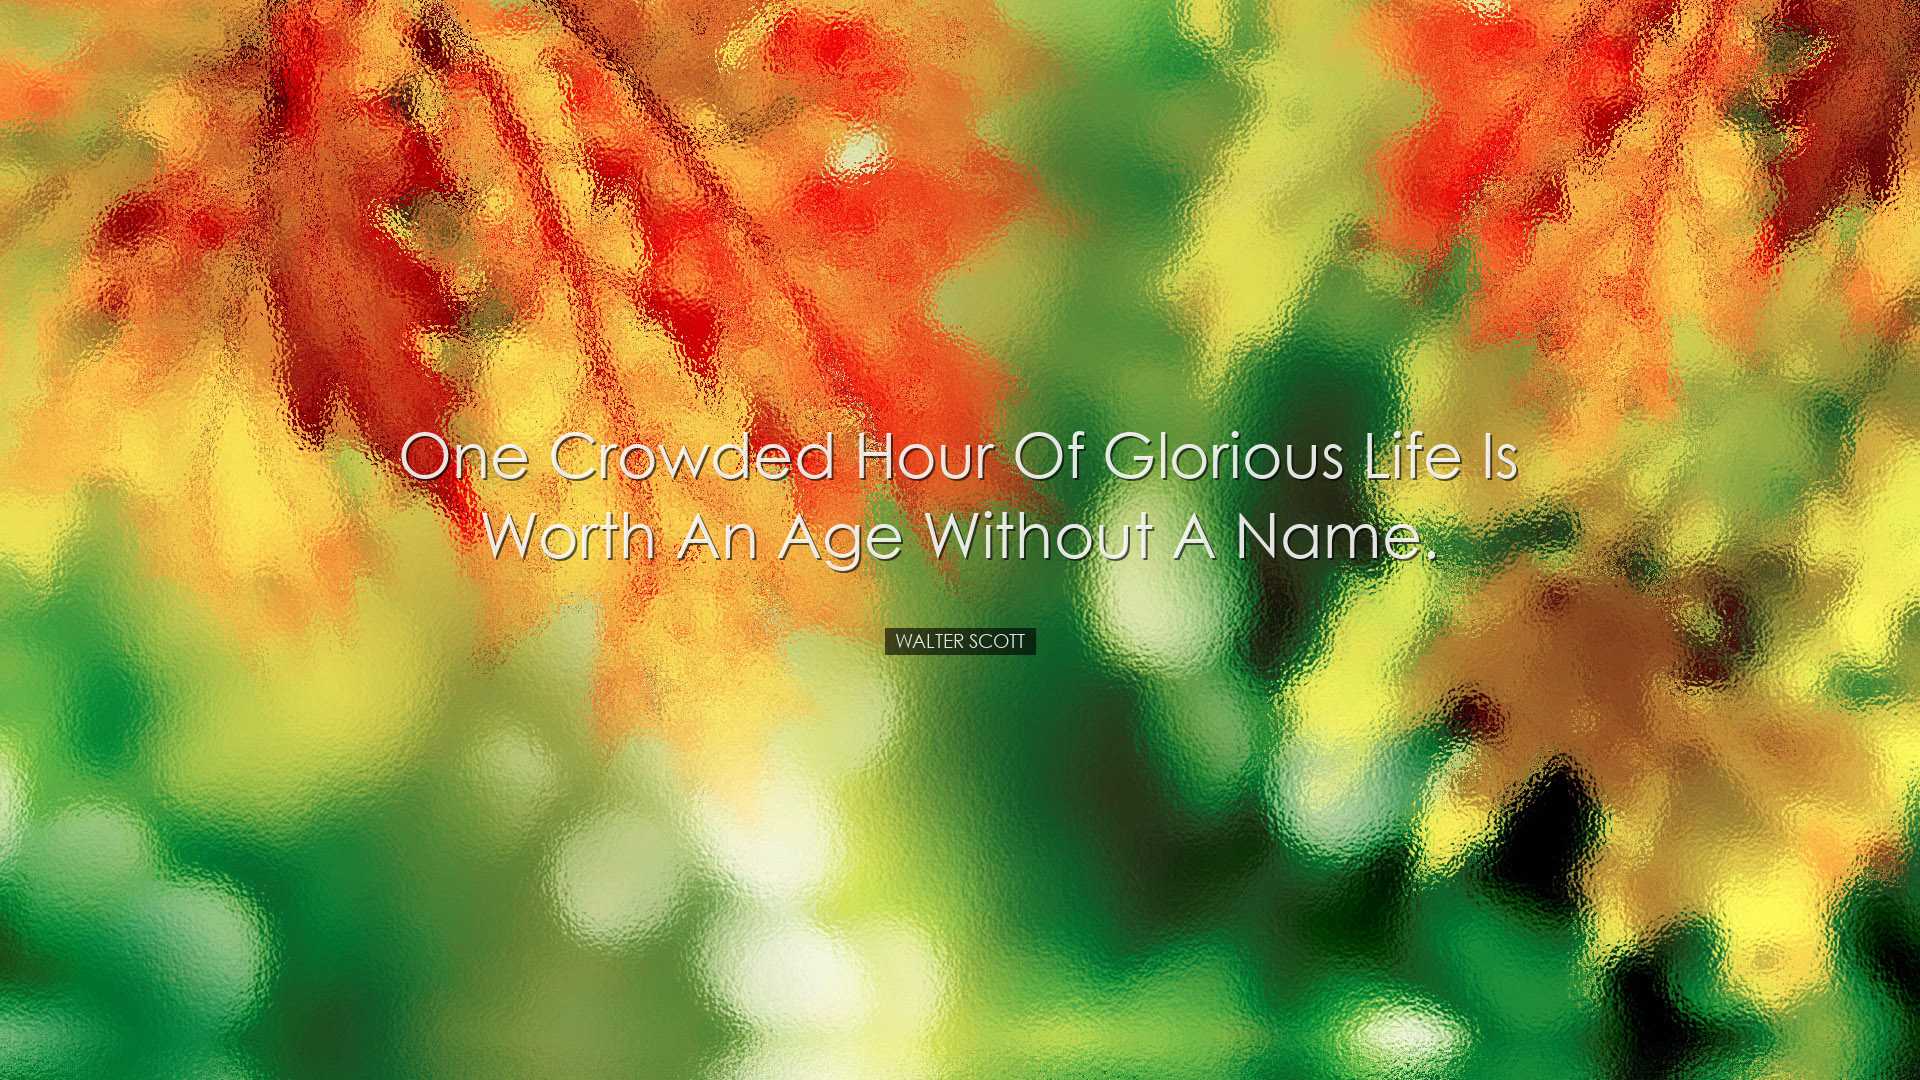 One crowded hour of glorious life is worth an age without a name.